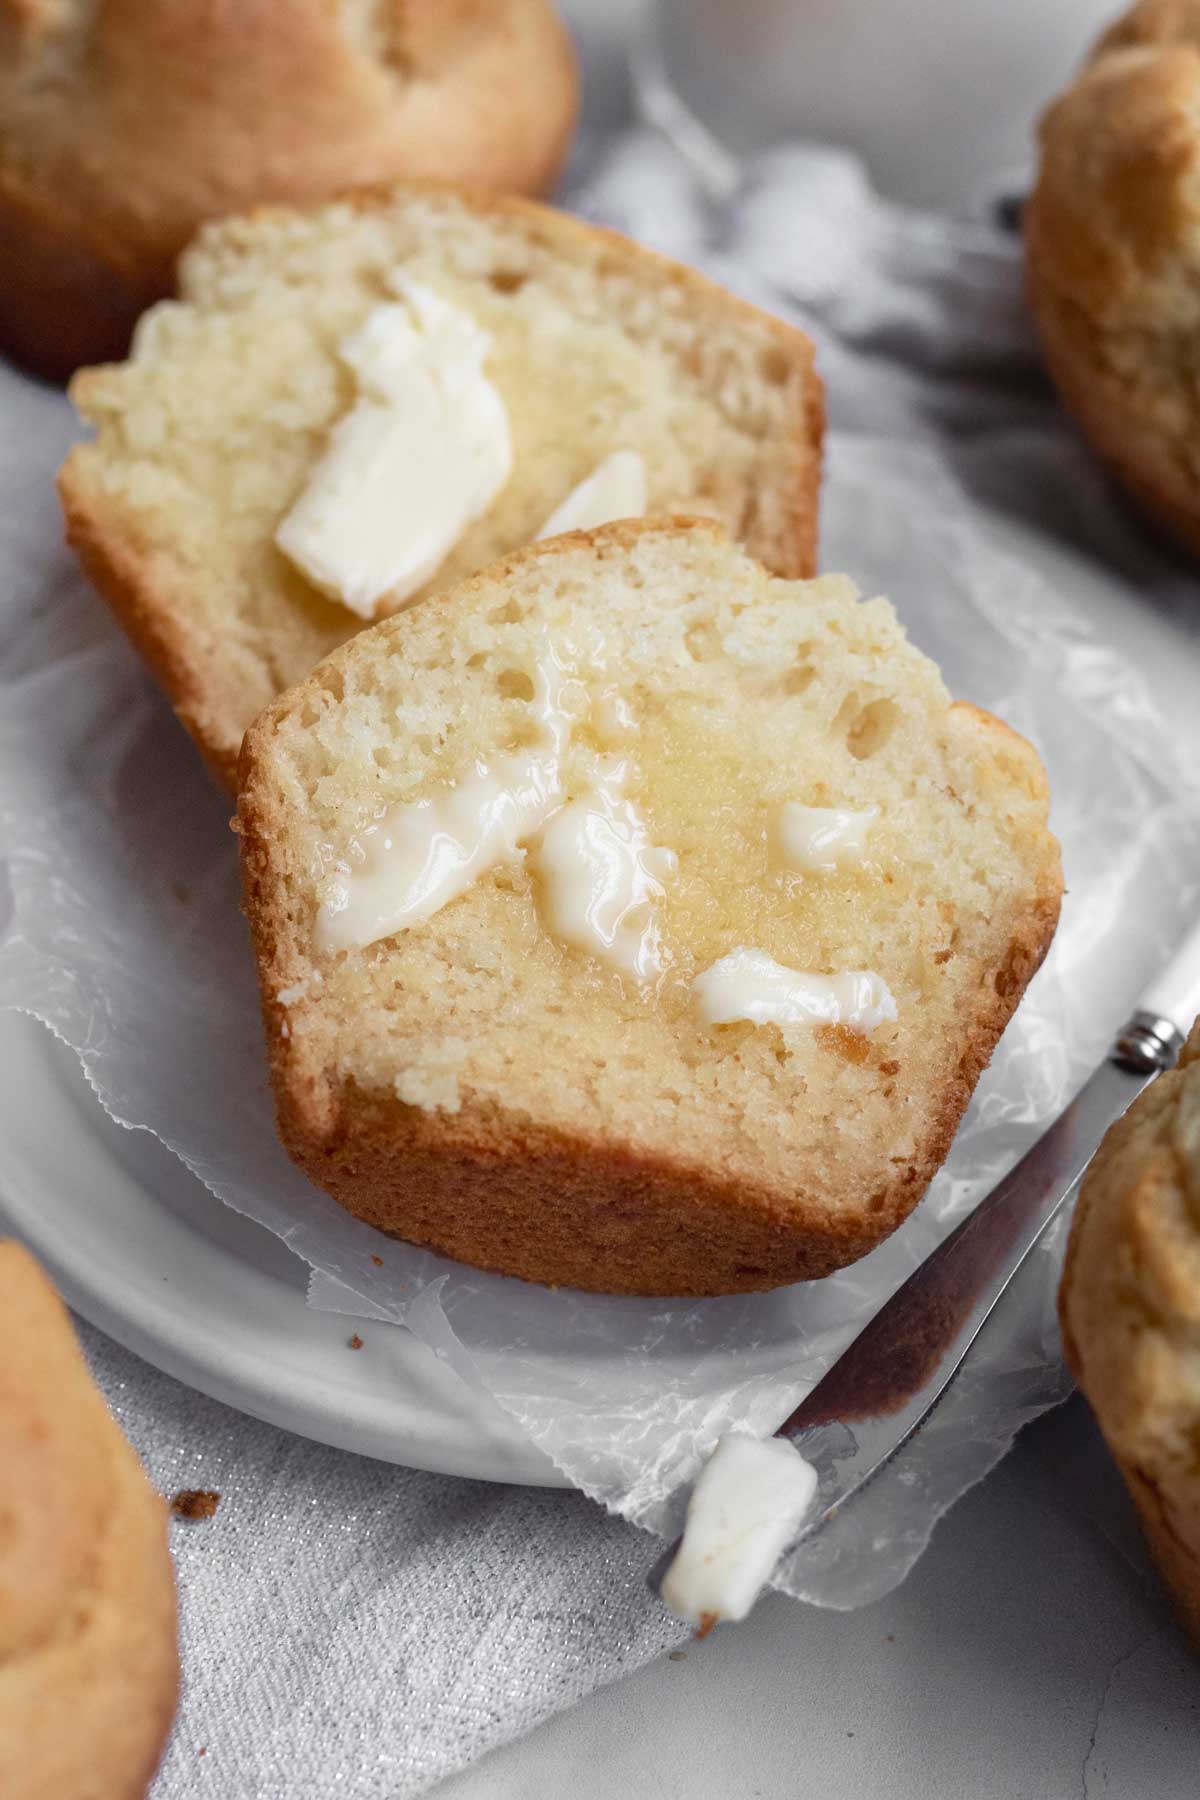 Slices of butter melt on the halves of the Vanilla Muffin activating flavorful excellence.